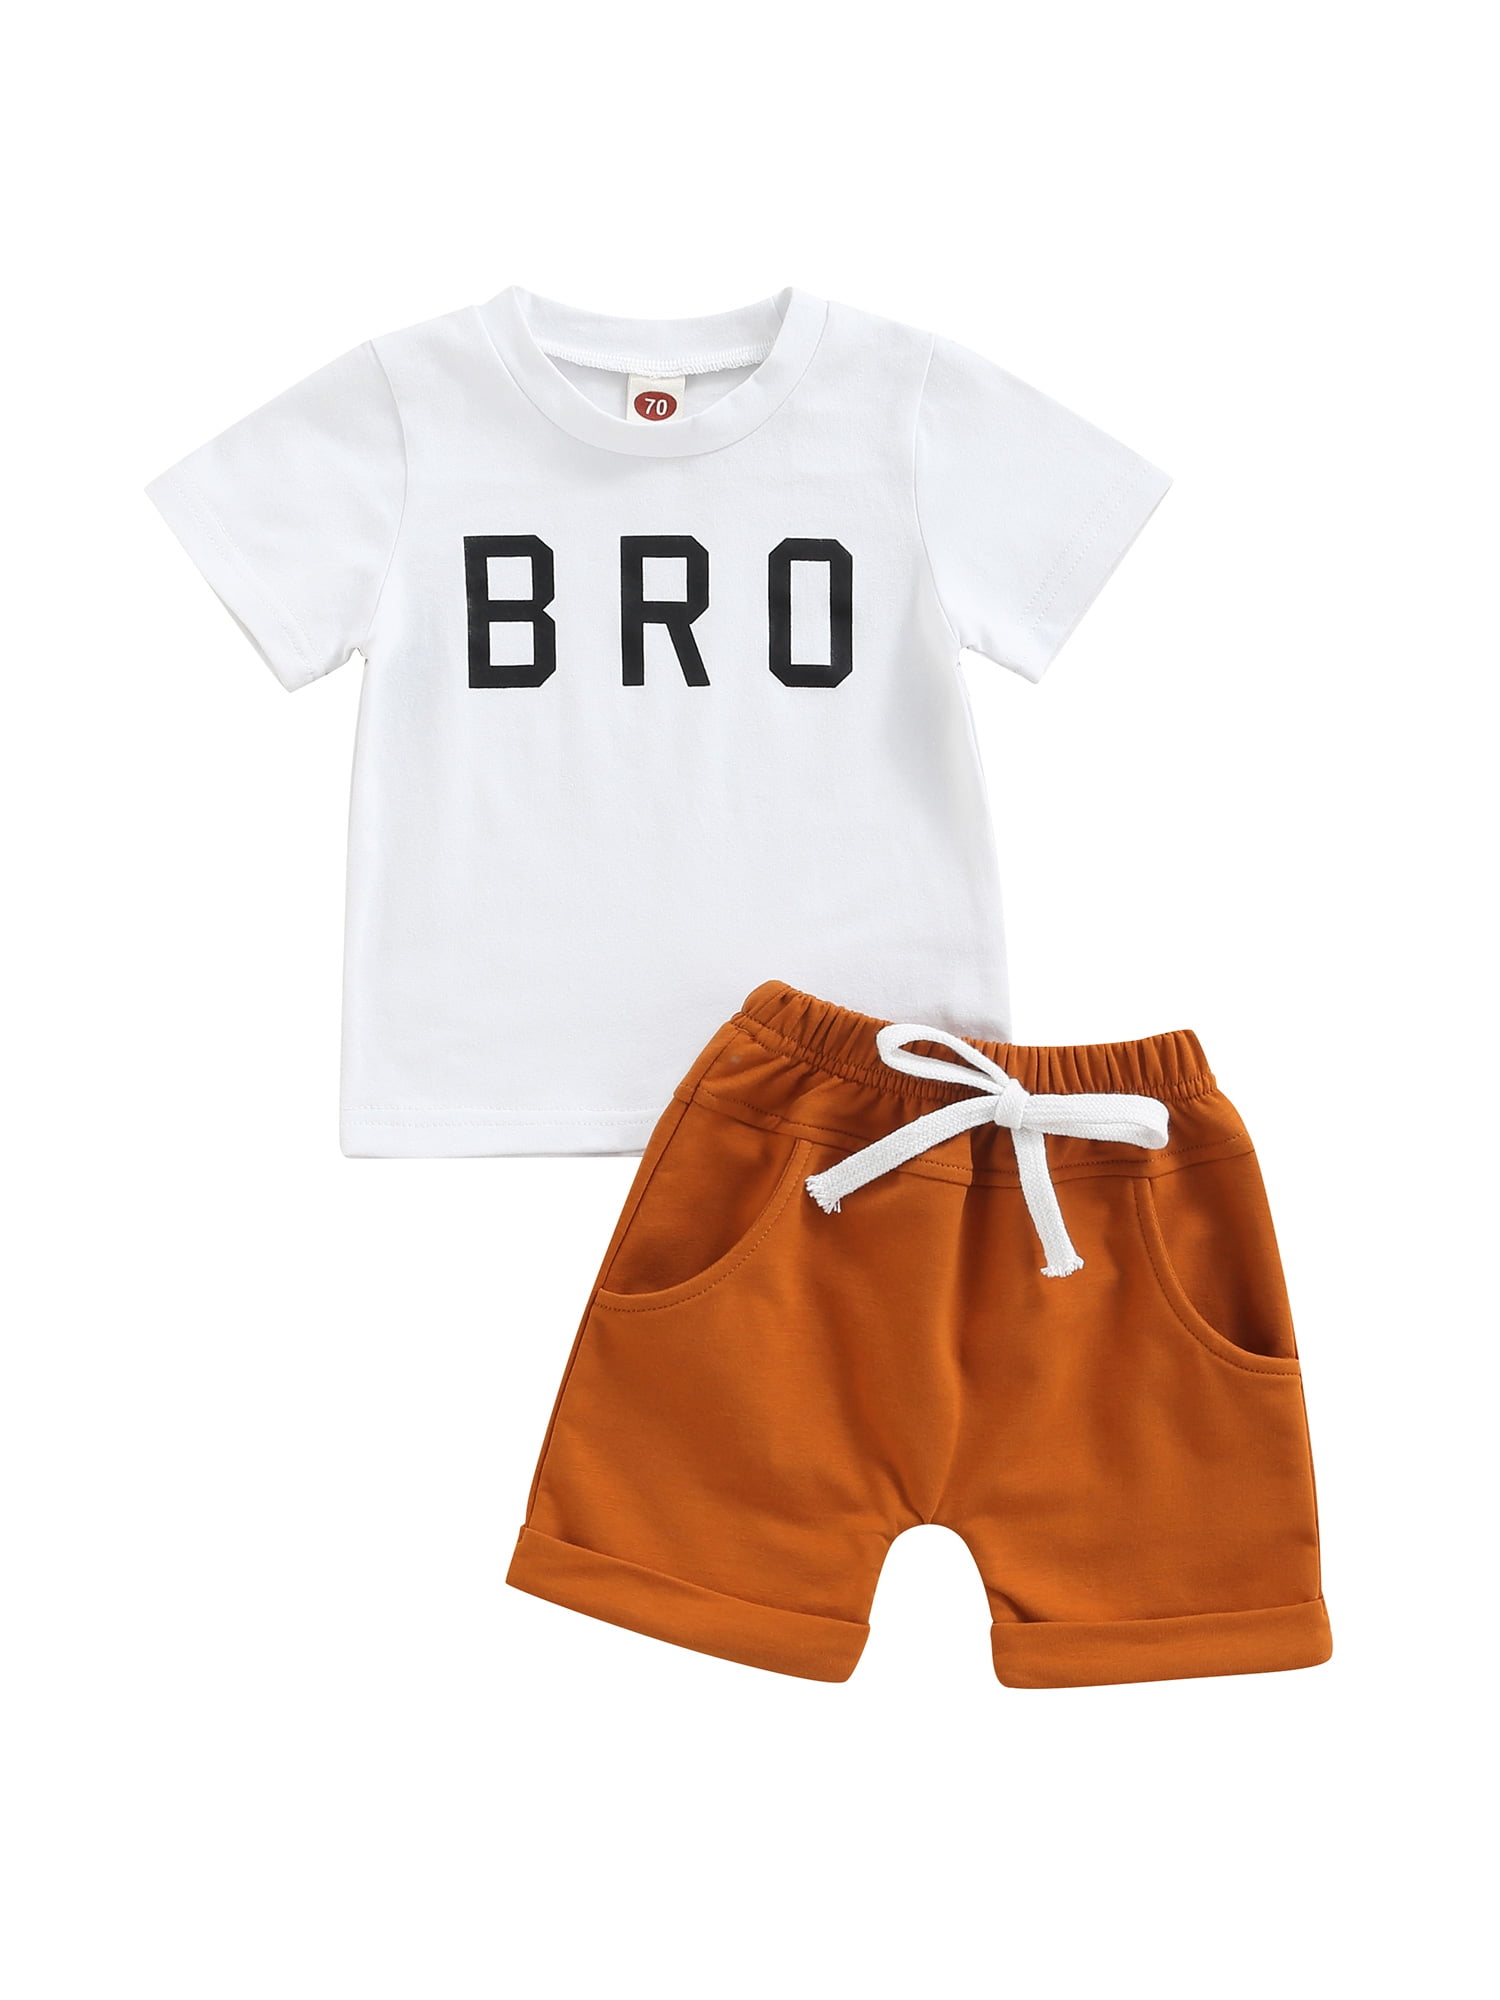 Infant Baby Kids Boys Summer Clothes Set Print T-shirt Tops+Solid Shorts Outfits 